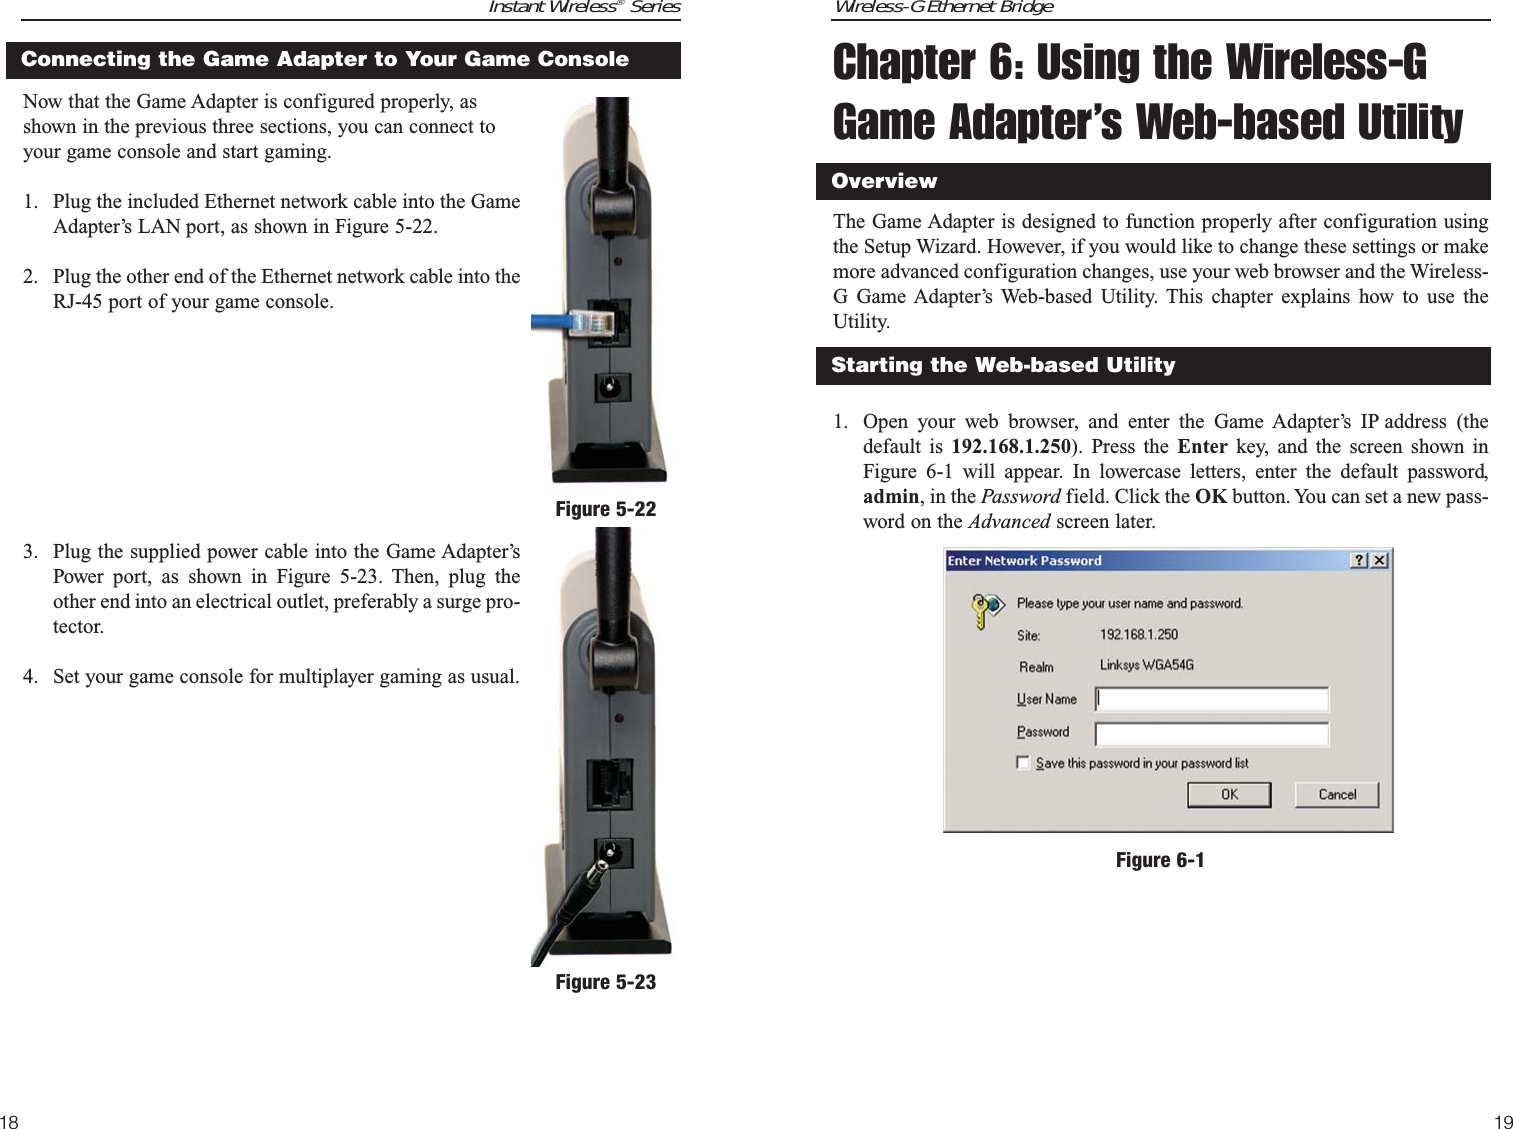 Wireless-G Ethernet BridgeChapter 6: Using the Wireless-GGame Adapter’s Web-based UtilityThe Game Adapter is designed to function properly after configuration usingthe Setup Wizard. However, if you would like to change these settings or makemore advanced configuration changes, use your web browser and the Wireless-G Game Adapter’s Web-based Utility. This chapter explains how to use theUtility.1. Open your web browser, and enter the Game Adapter’s IP address (thedefault is 192.168.1.250). Press the Enter key, and the screen shown inFigure 6-1 will appear. In lowercase letters, enter the default password,admin, in the Password field. Click the OK button. You can set a new pass-word on the Advanced screen later. 19Starting the Web-based UtilityOverviewFigure 6-1Instant Wireless®SeriesNow that the Game Adapter is configured properly, asshown in the previous three sections, you can connect toyour game console and start gaming.1. Plug the included Ethernet network cable into the GameAdapter’s LAN port, as shown in Figure 5-22.2. Plug the other end of the Ethernet network cable into theRJ-45 port of your game console.3. Plug the supplied power cable into the Game Adapter’sPower port, as shown in Figure 5-23. Then, plug theother end into an electrical outlet, preferably a surge pro-tector. 4. Set your game console for multiplayer gaming as usual.18Connecting the Game Adapter to Your Game ConsoleFigure 5-22Figure 5-23